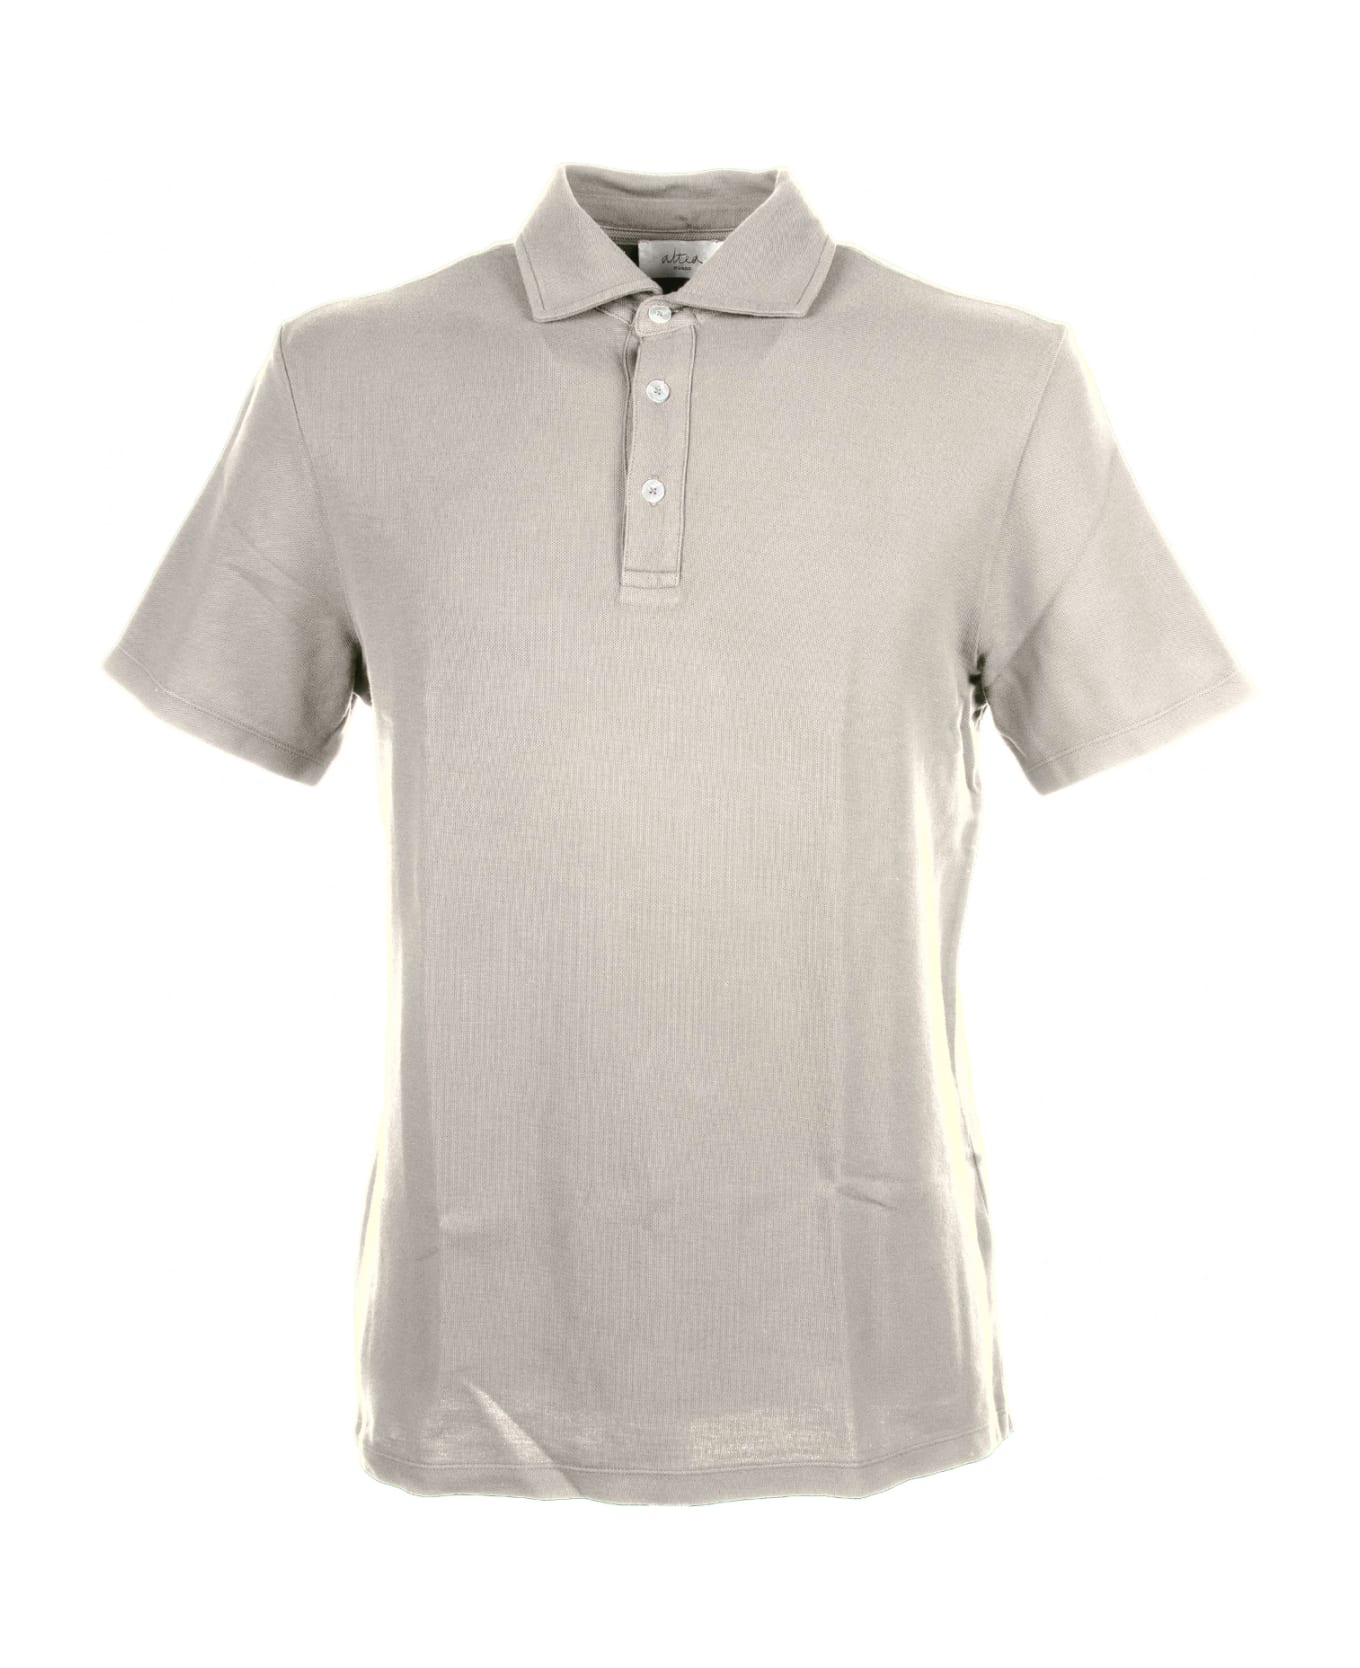 Altea Ice Short-sleeved Polo Shirt In Cotton - GHIACCIO ポロシャツ